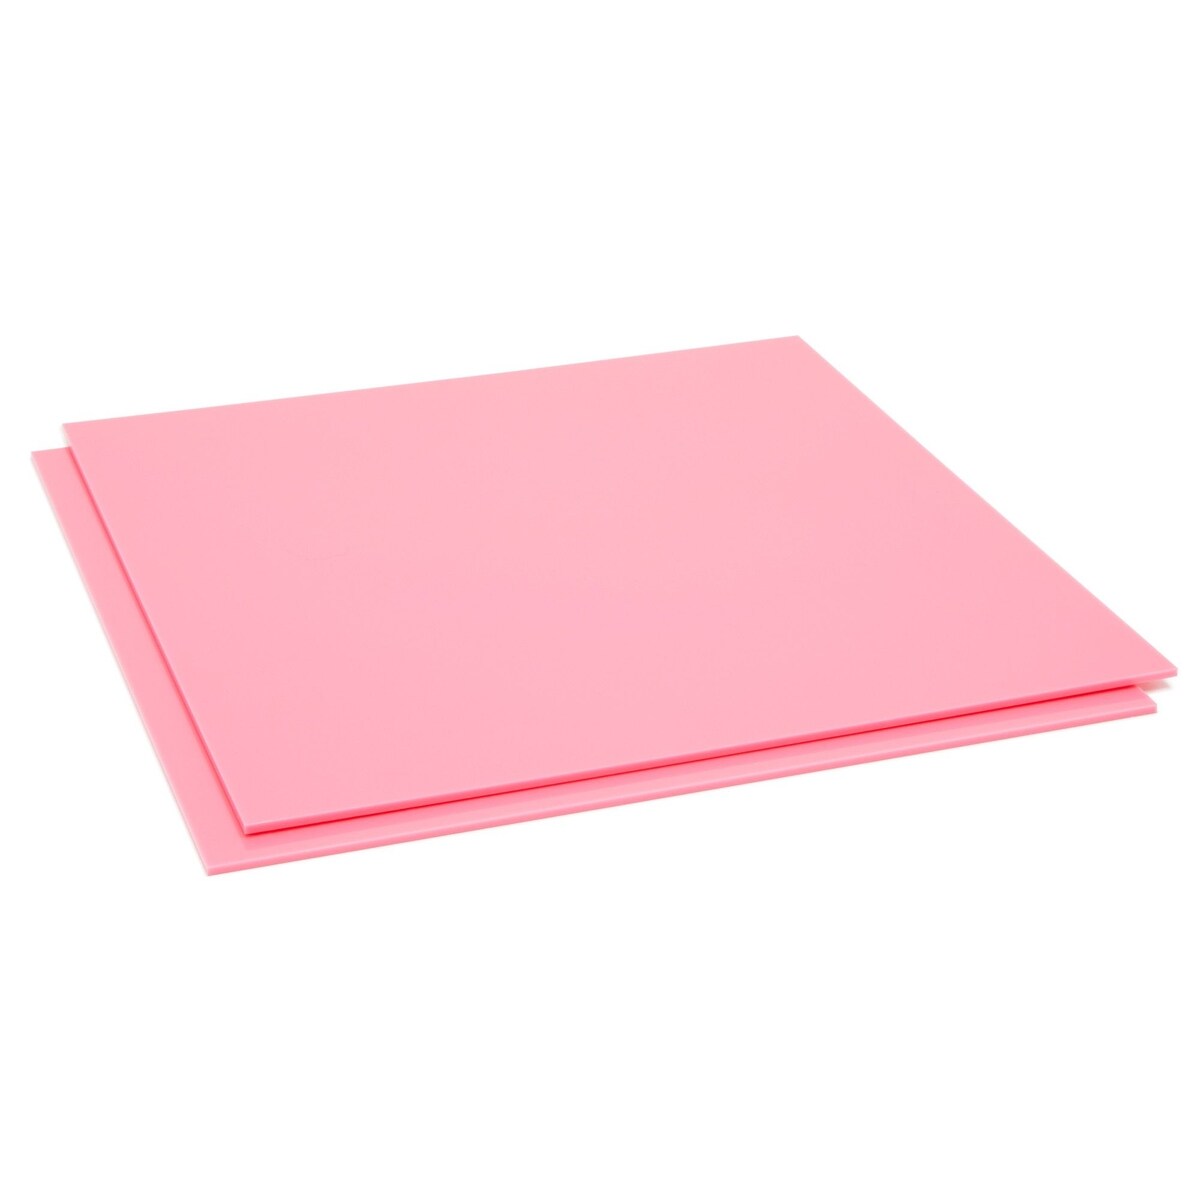 3MM Peach Pink Single Matte Acrylic Sheet Frosted Translucent Cast  Plexiglass Plastic Board For Box,Craft,Sign,DIY Display